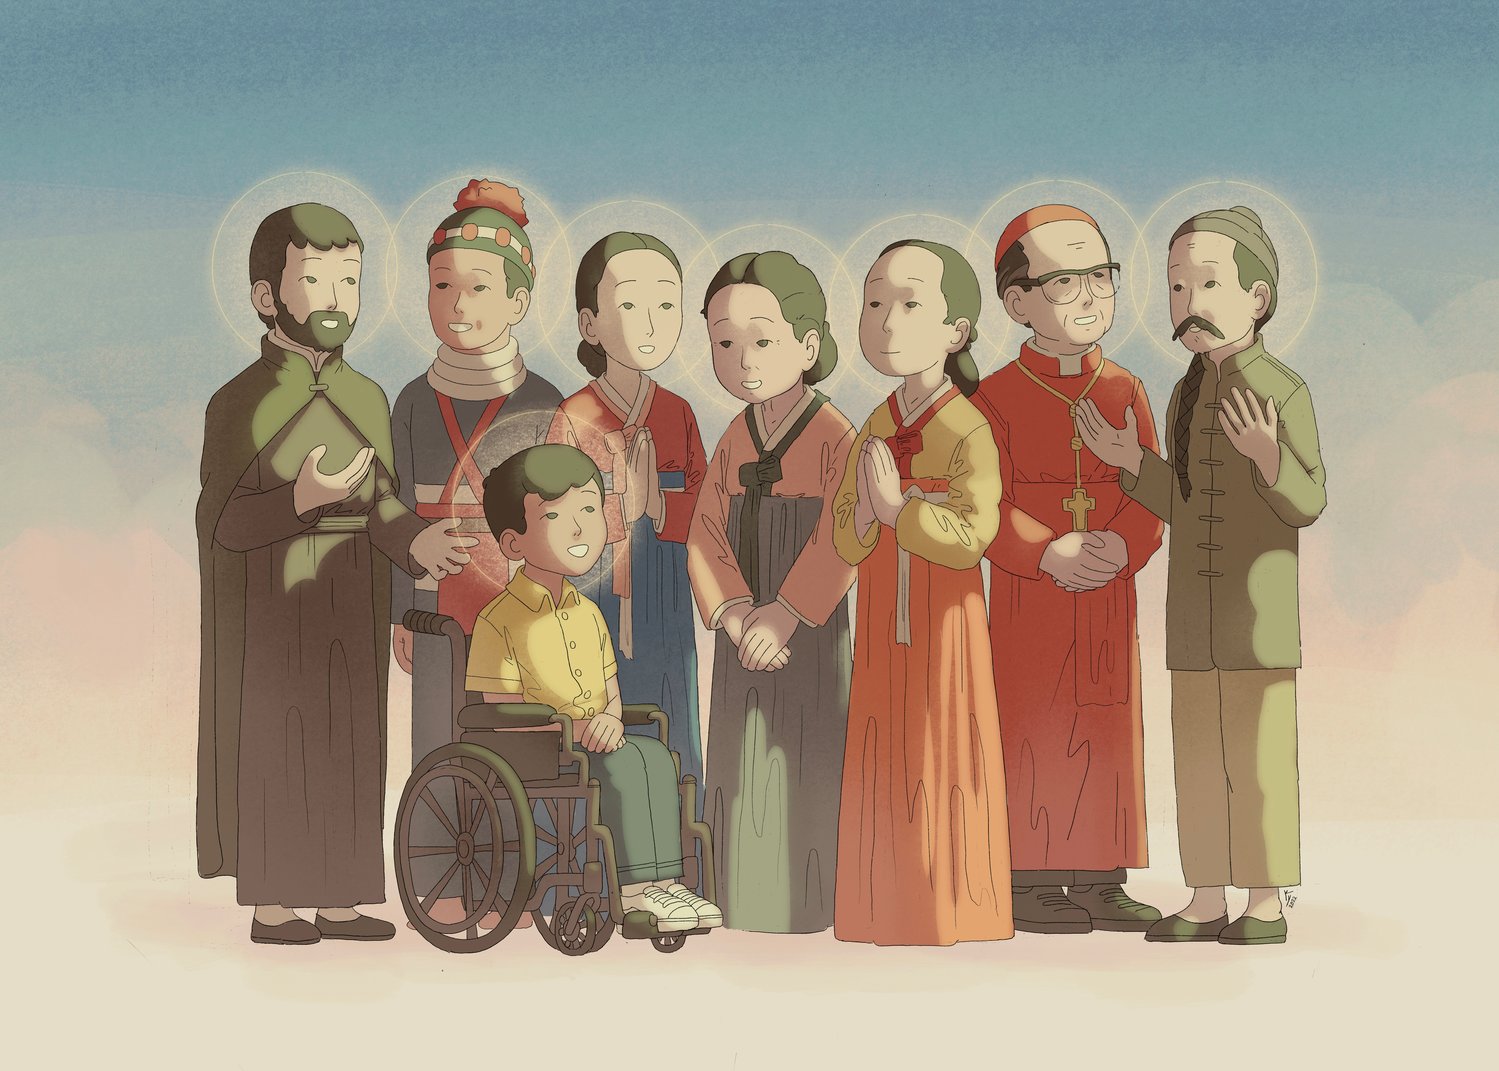 Pictured from left to right are Blessed Peter Kasui Kibe, Blessed Paul Thoj Xyooj, Darwin Ramos, St. Columba Kim Hyo-Im, St. Magdalena Son So-Byok, St. Agnes Kim Hyo-Ju, Cardinal Francis Xavier Nguyen Van Thuan and St. Mark Ji Tianxiang.